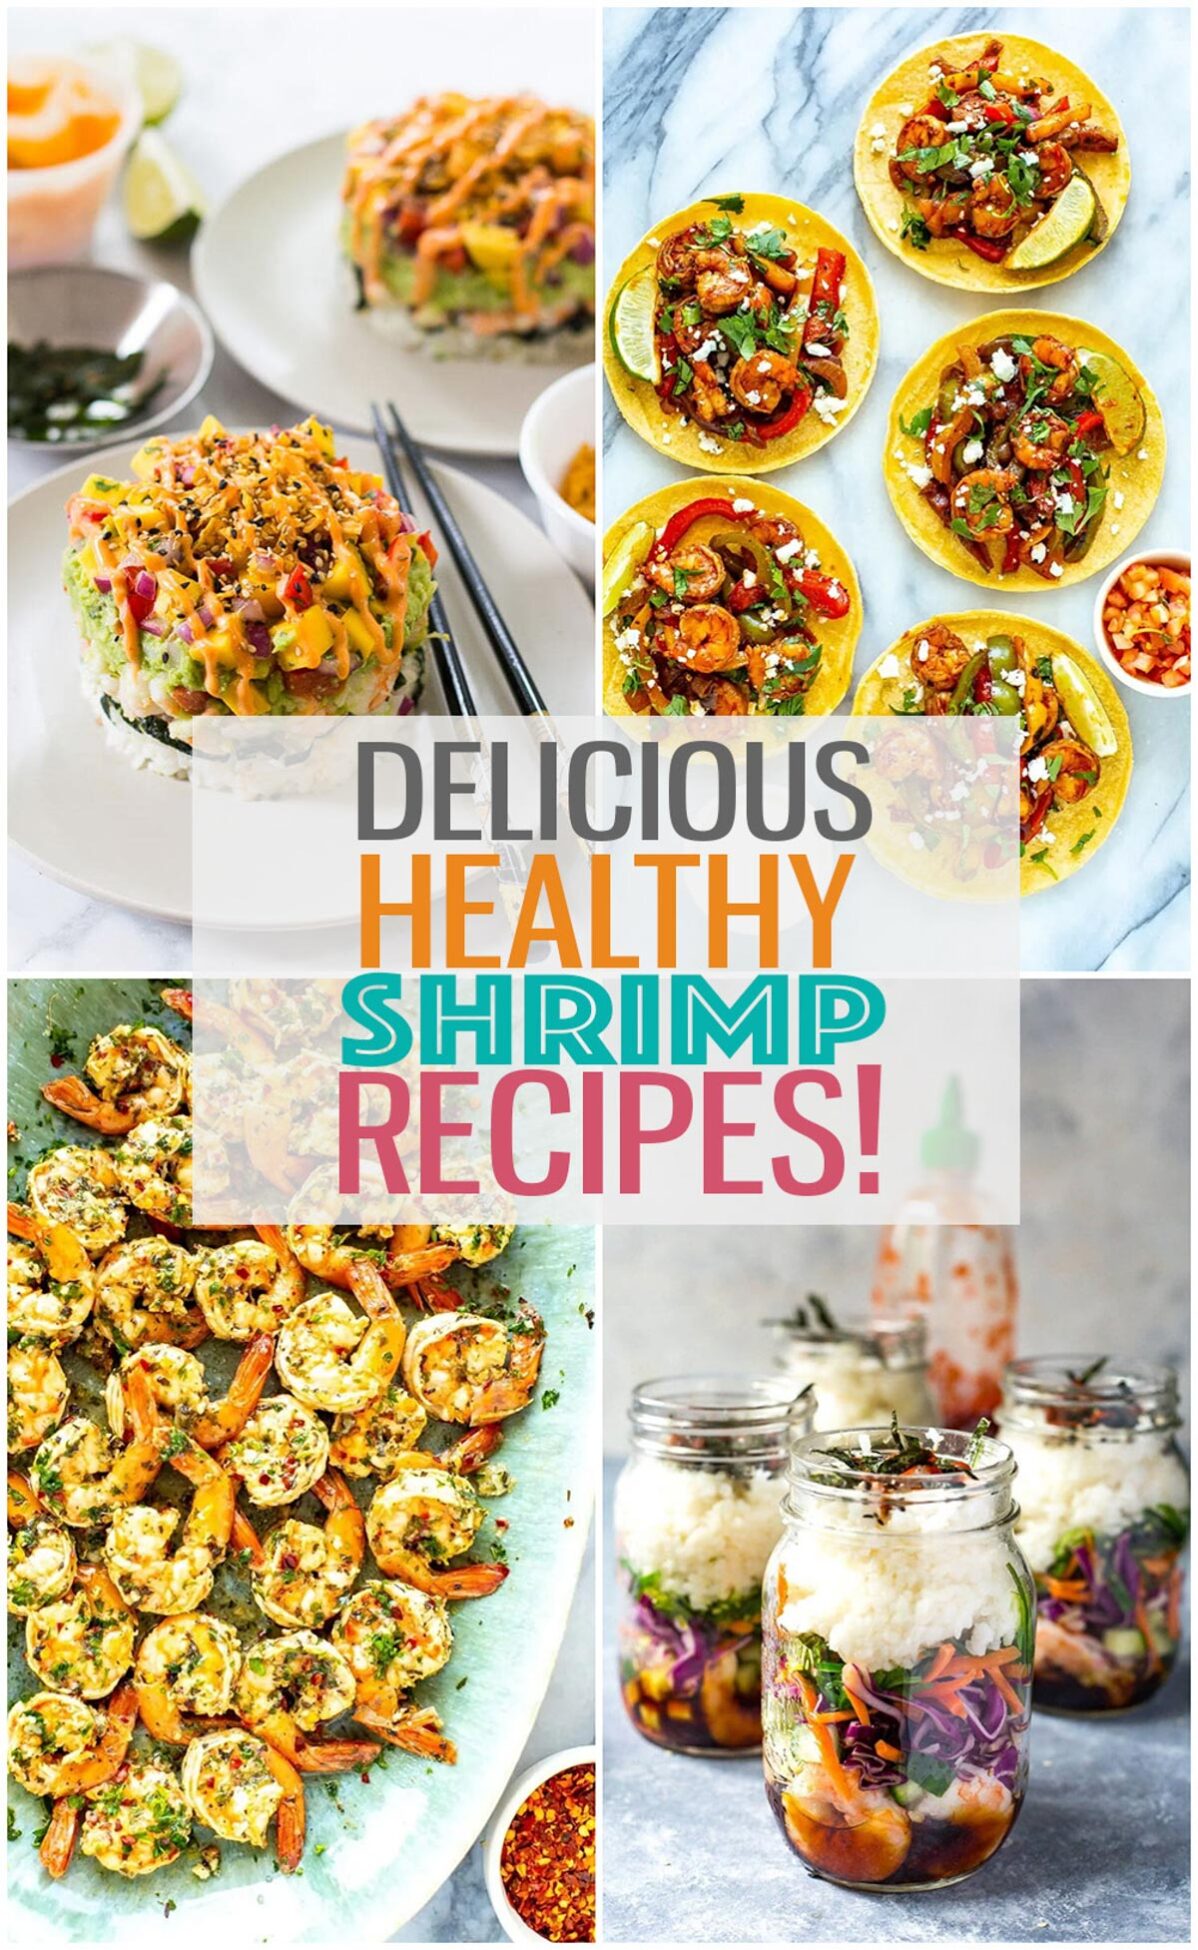 A collage of four shrimp recipes with the text "Delicious Healthy Shrimp Recipes!" layered over top.